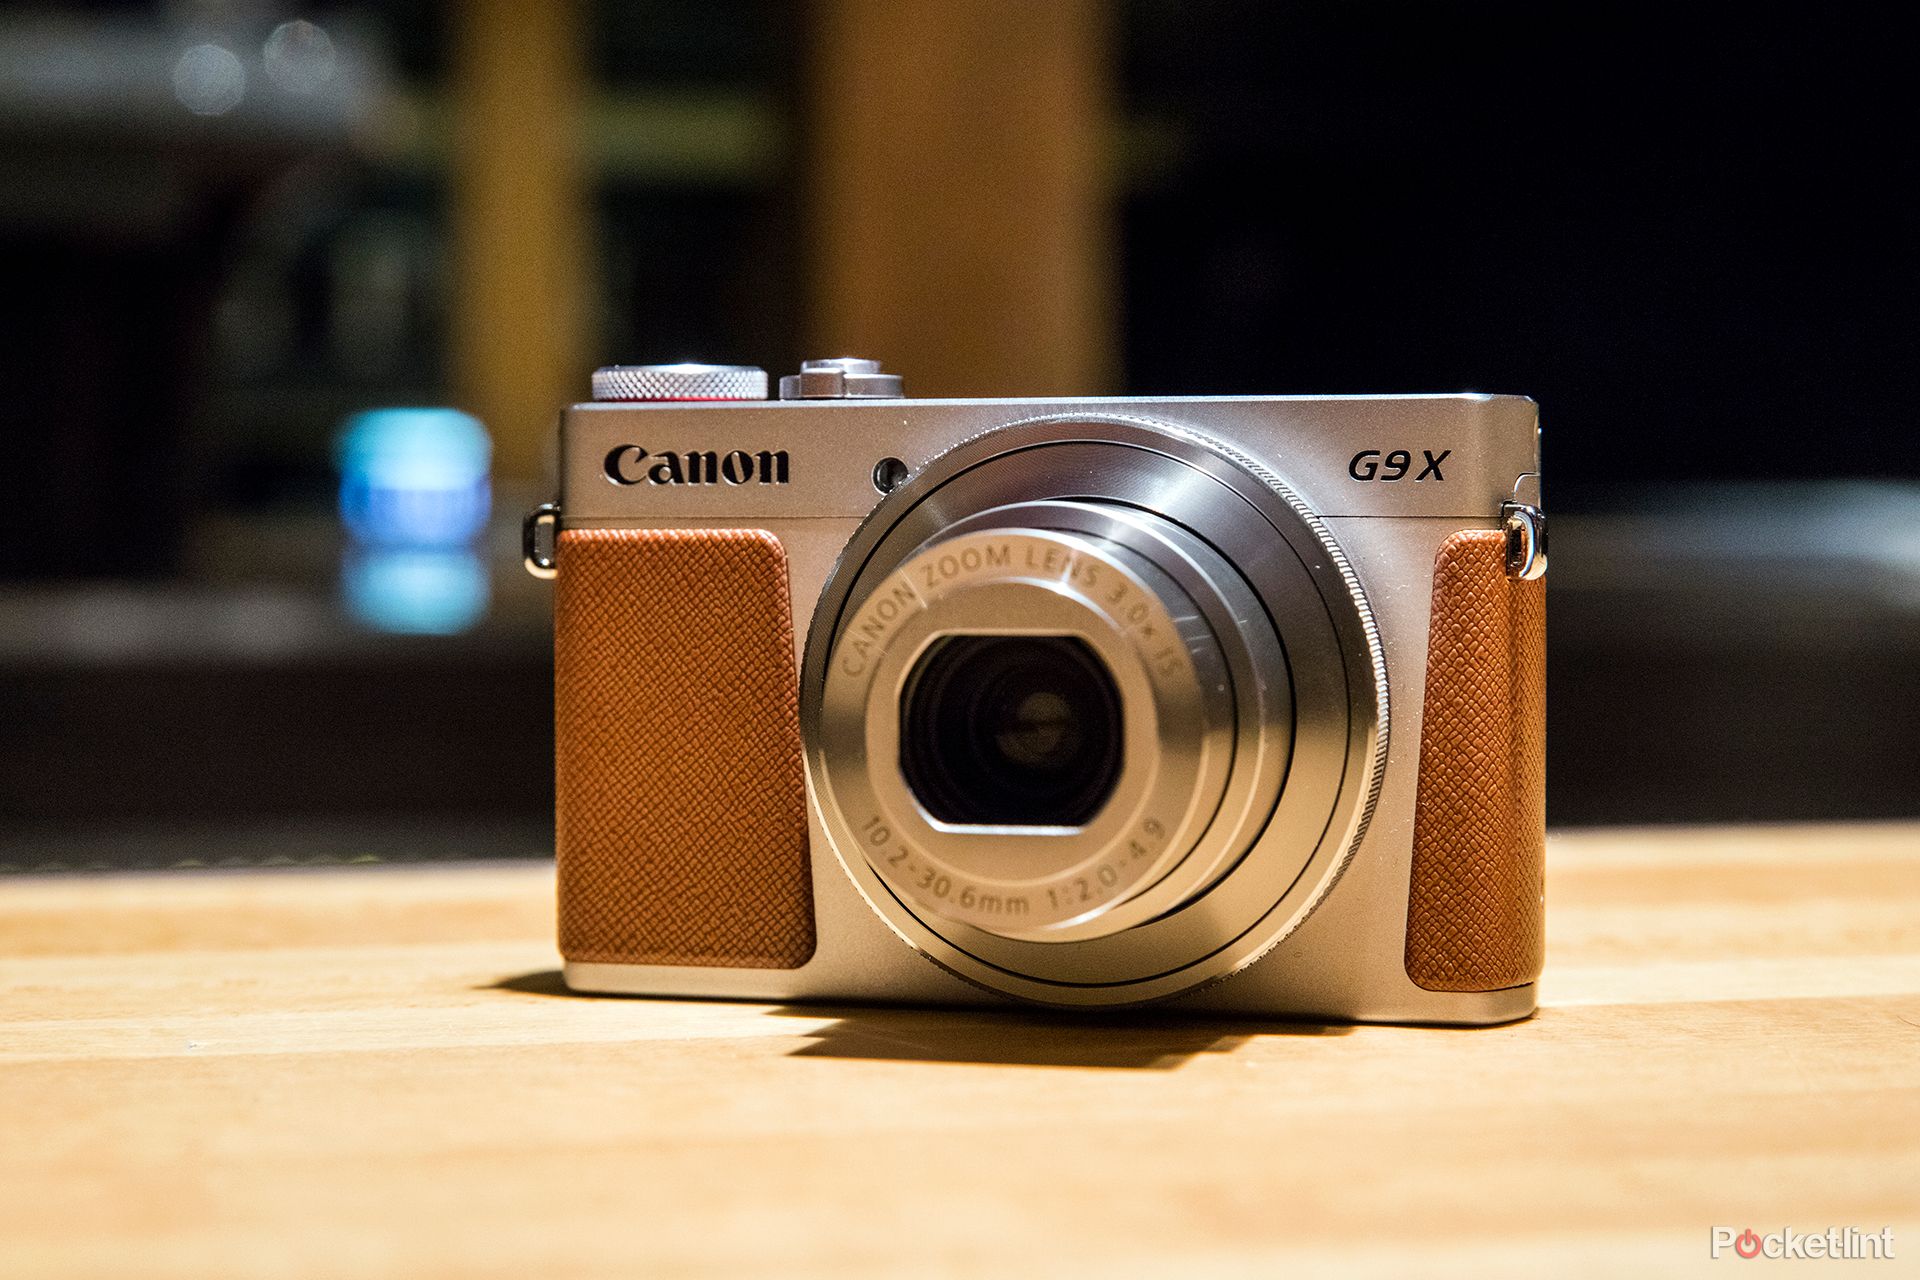 canon powershot g9 x review image 1